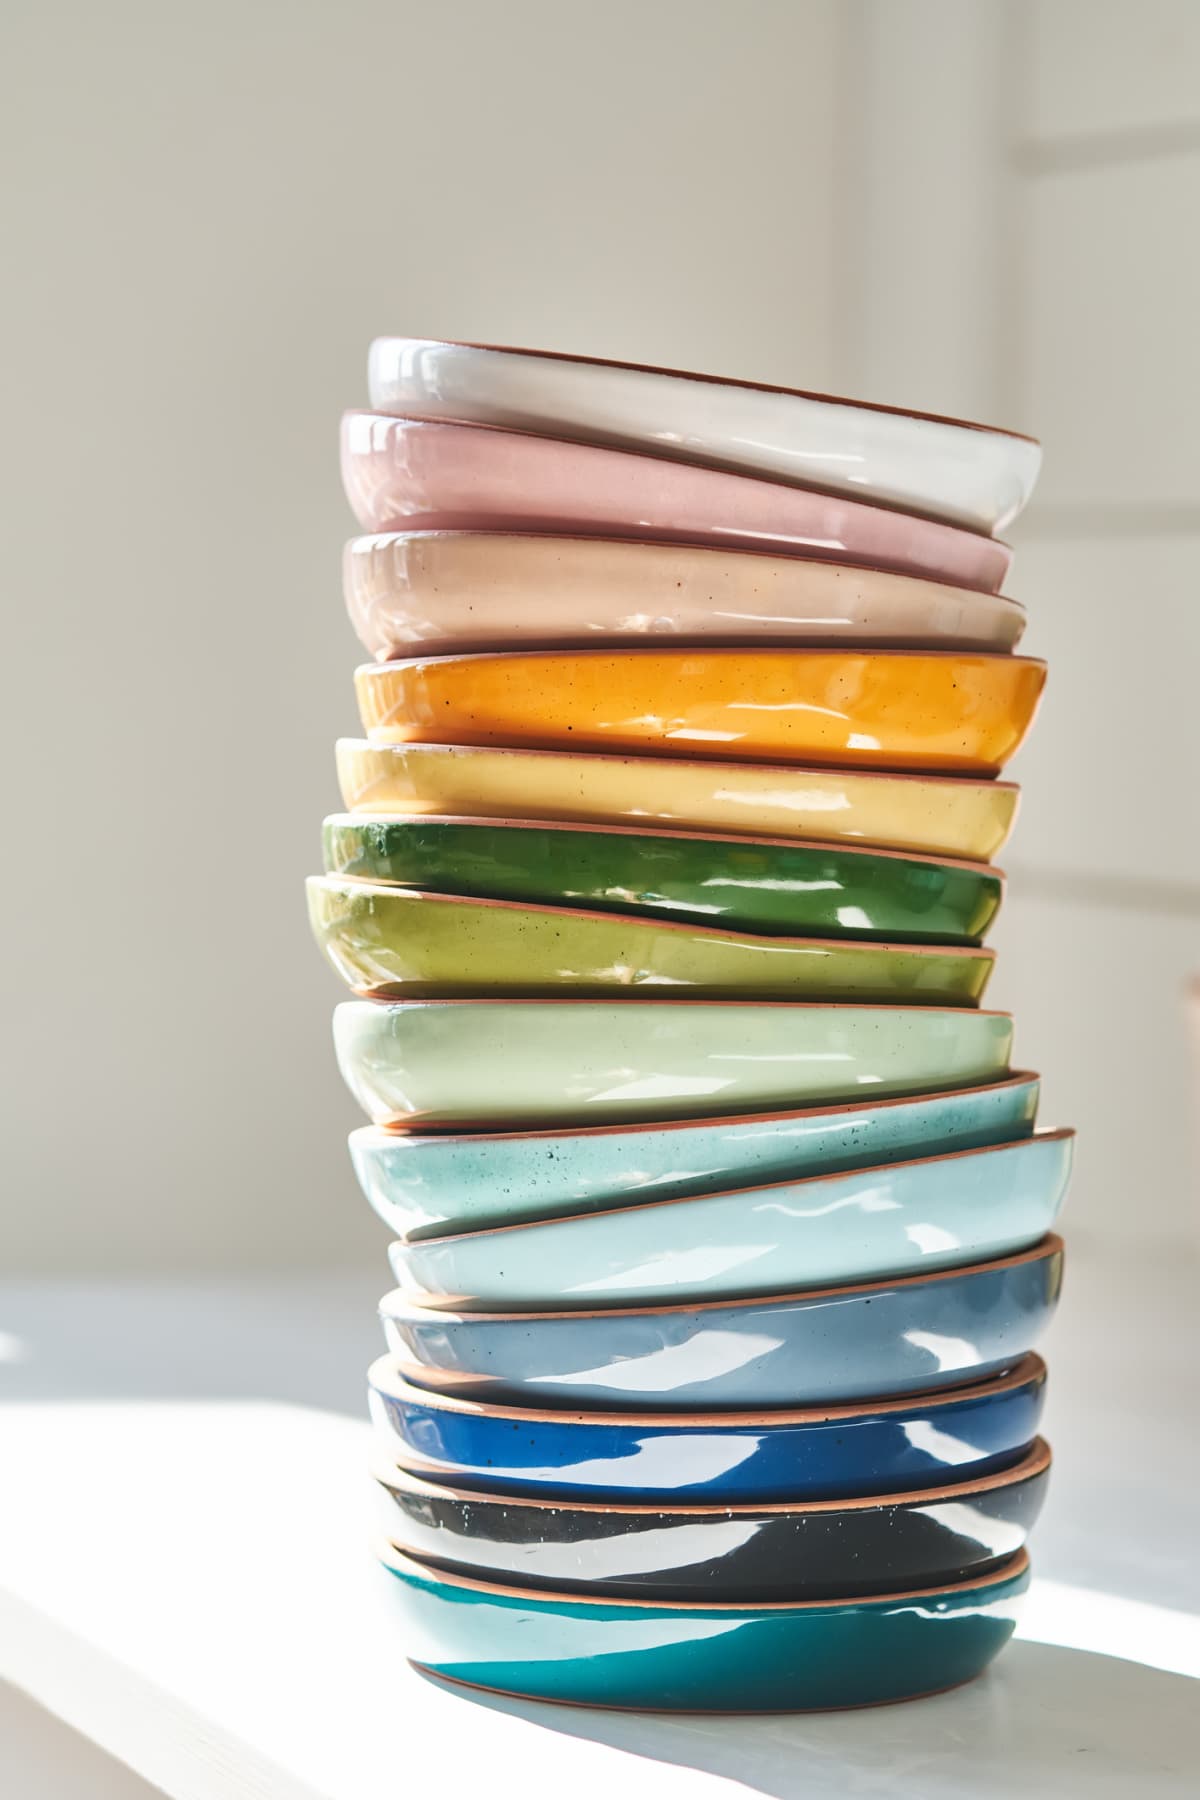 Ceramic dinner plates stacked in a tall pile